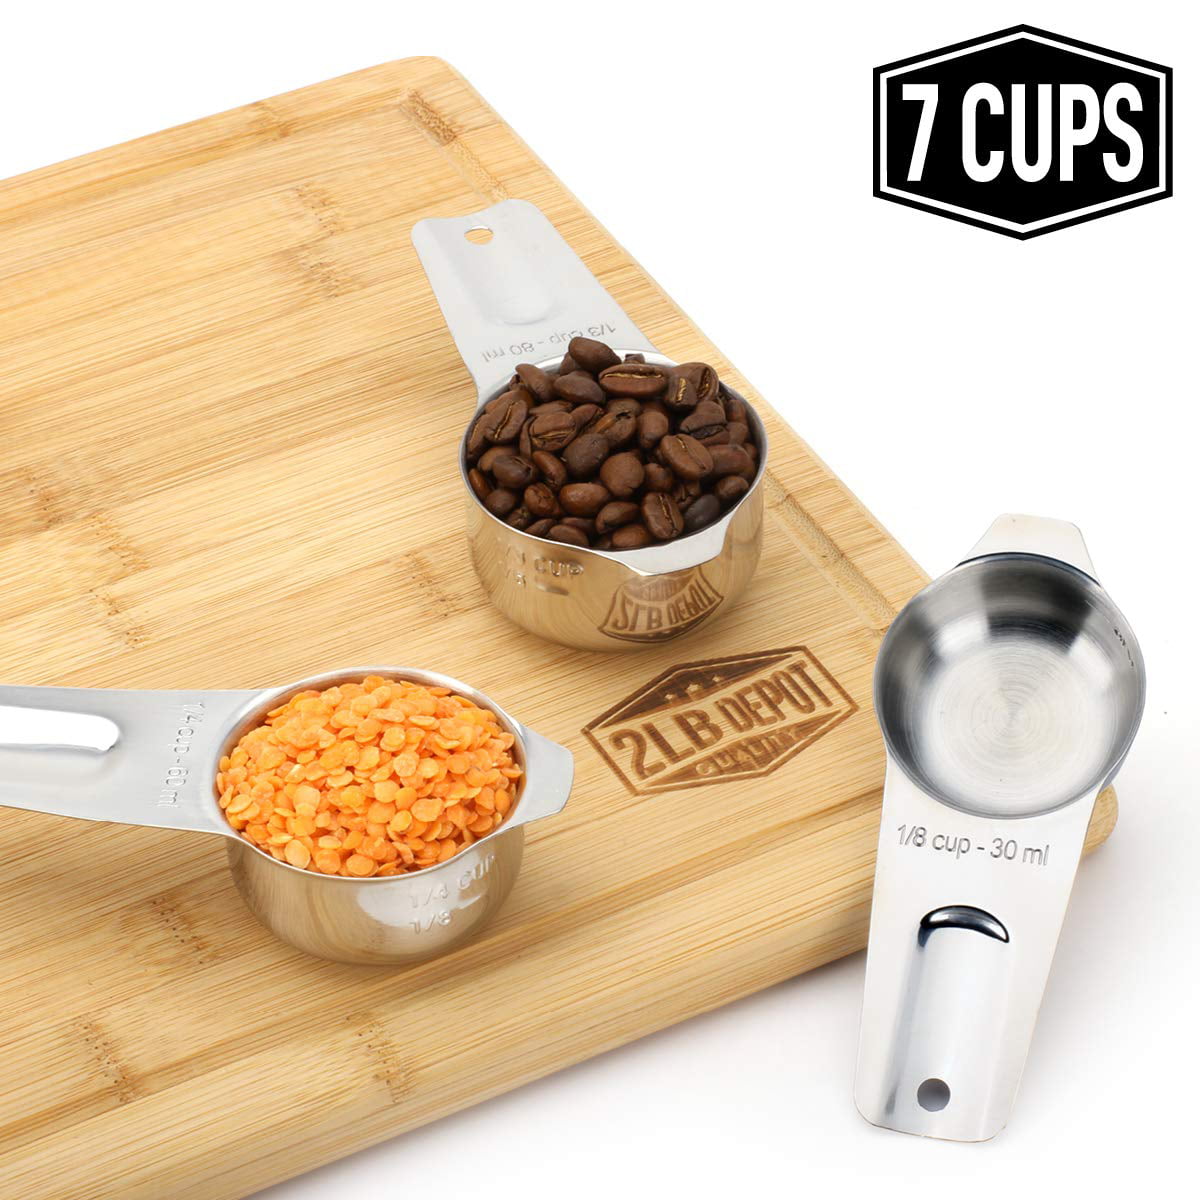 2 Set Measuring Cups Set Of 7 With 1/8 Cup Coffee Scoop, Stainless Steel  Metal Measuring Cup, 7 Pie